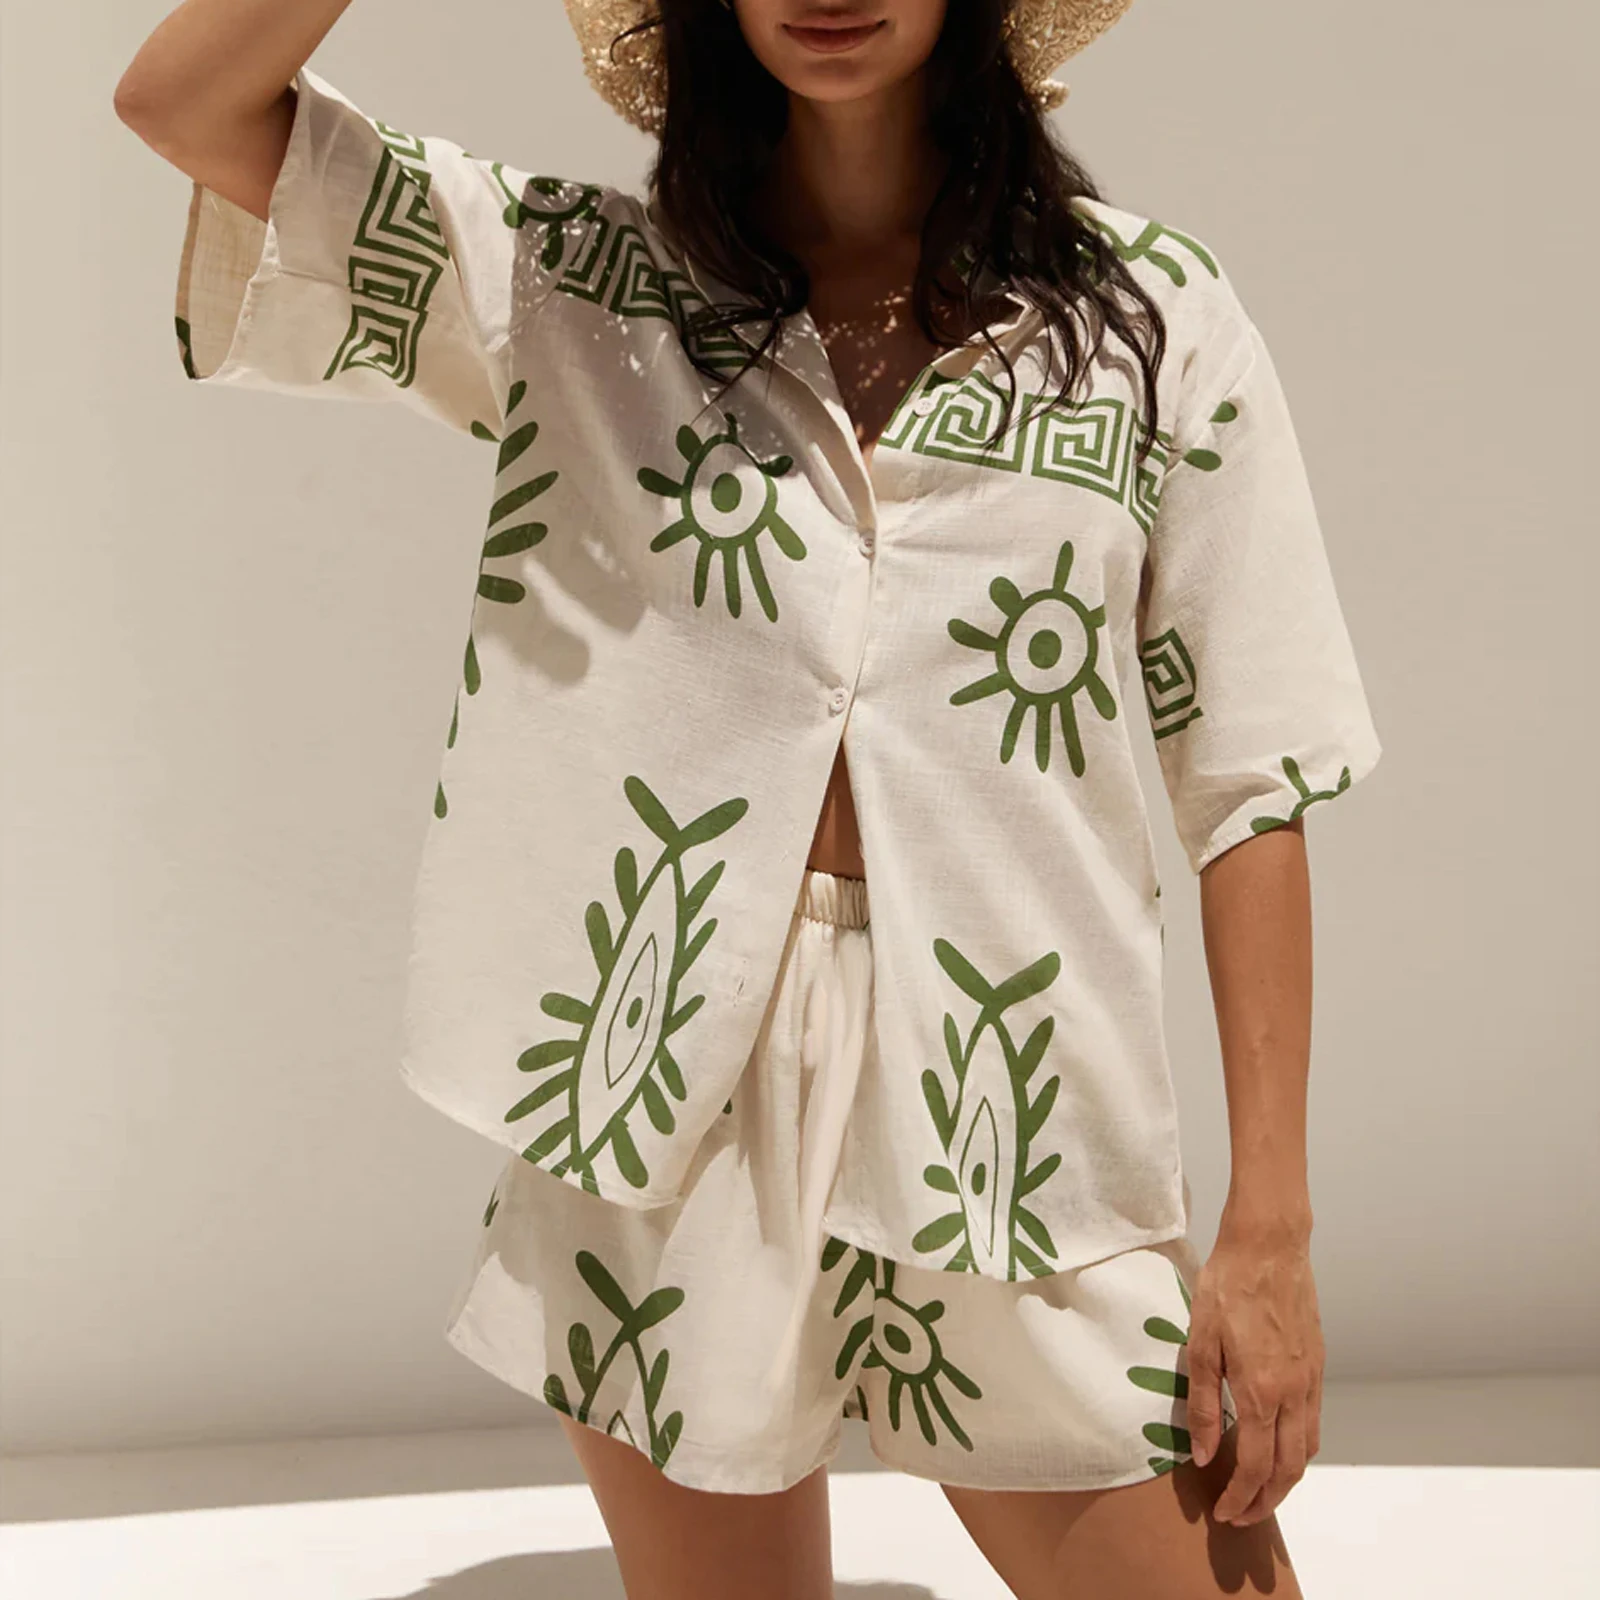 

Women’s Casual 2 Piece Print Outfits Fashion Printed Short Sleeve Button Up Tops + Shorts Set Beachwear